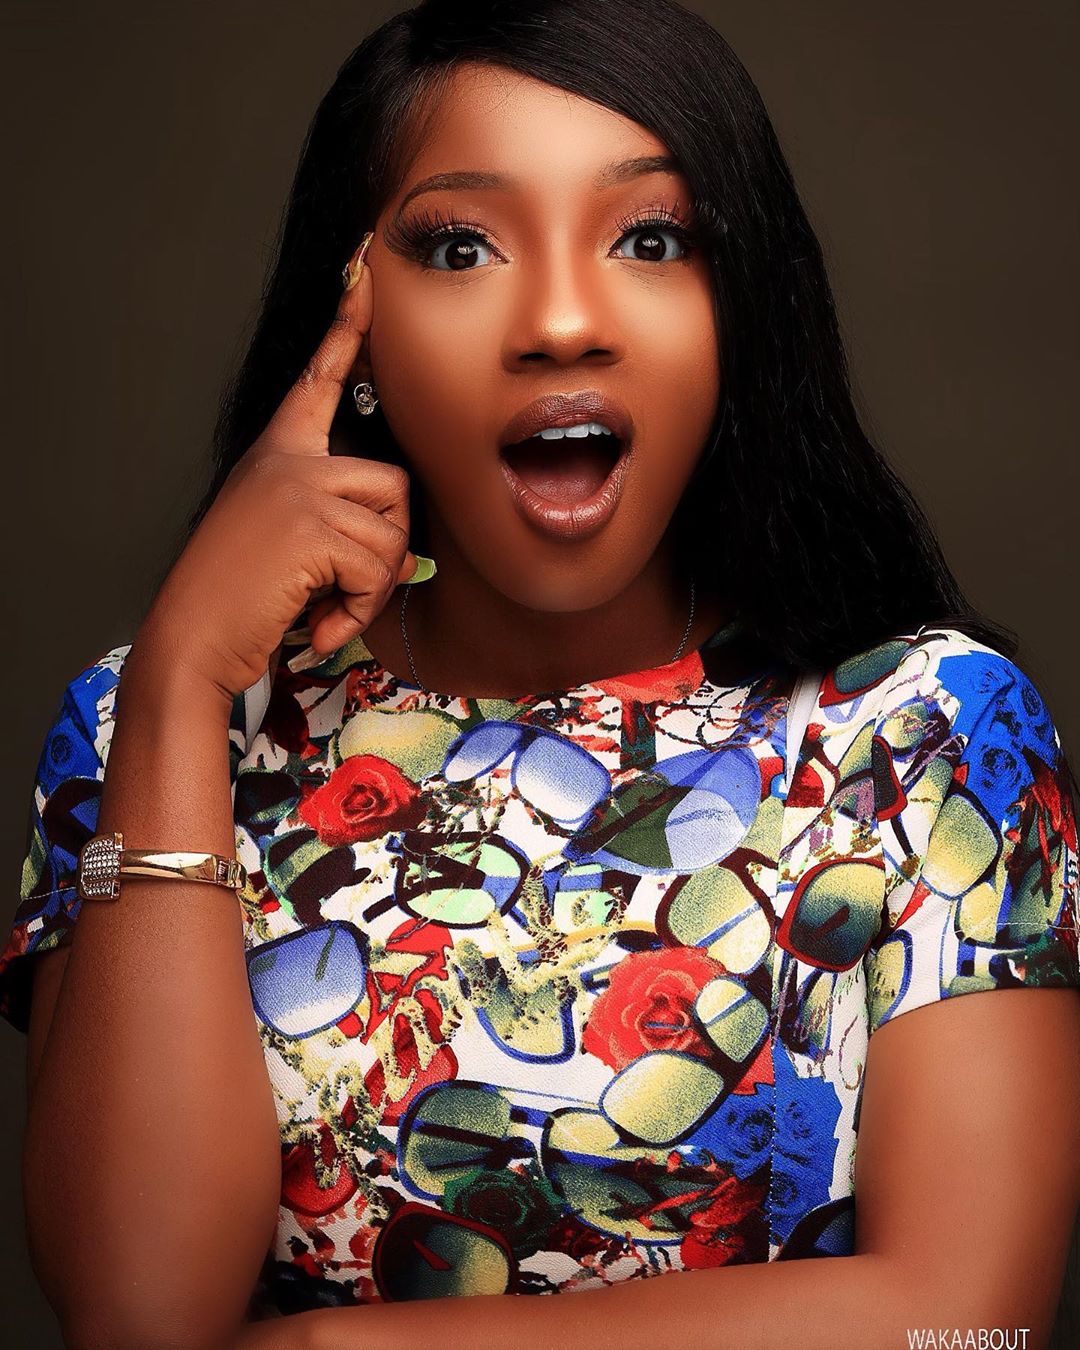 #BBNAIJA: Ex Big Brother Housemate Avala Celebrates Her Birthday in Purple Outfit